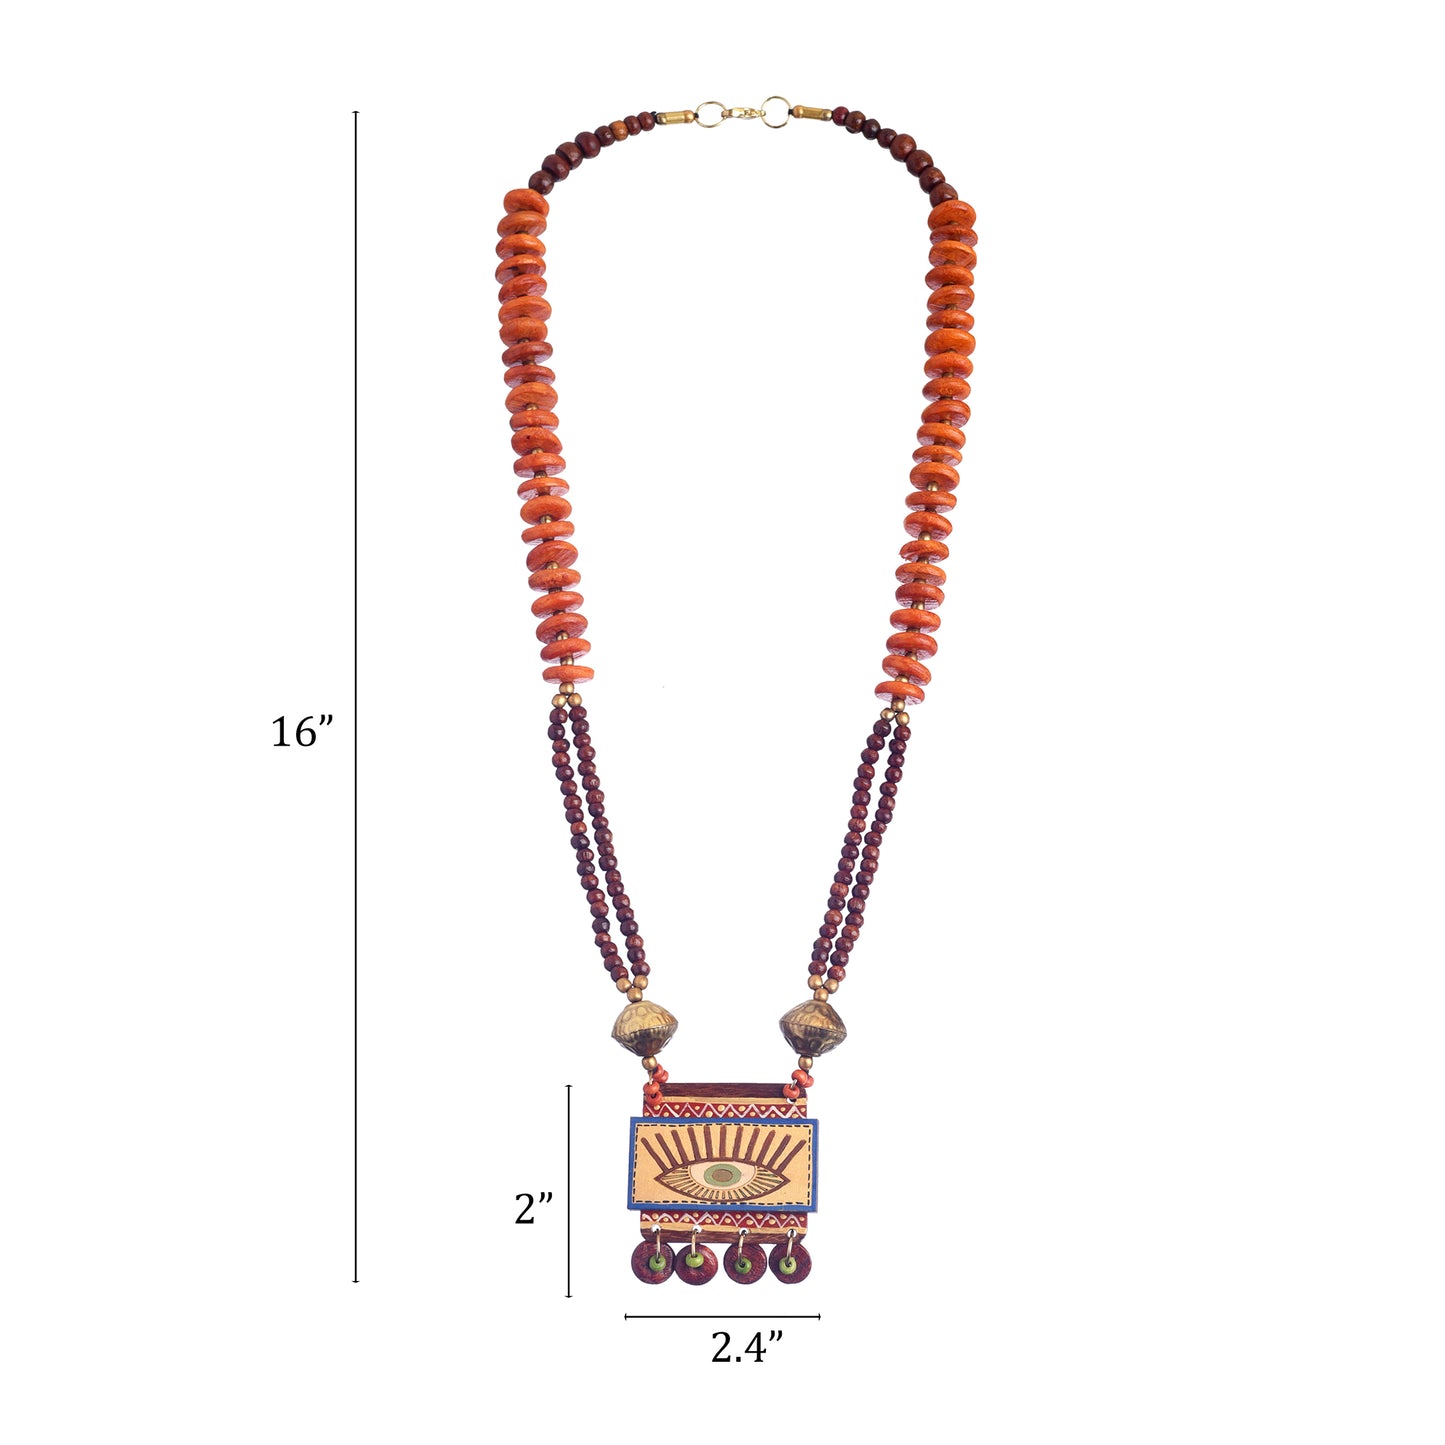 Evil Eye-I' Handcrafted Tribal Dhokra Necklace